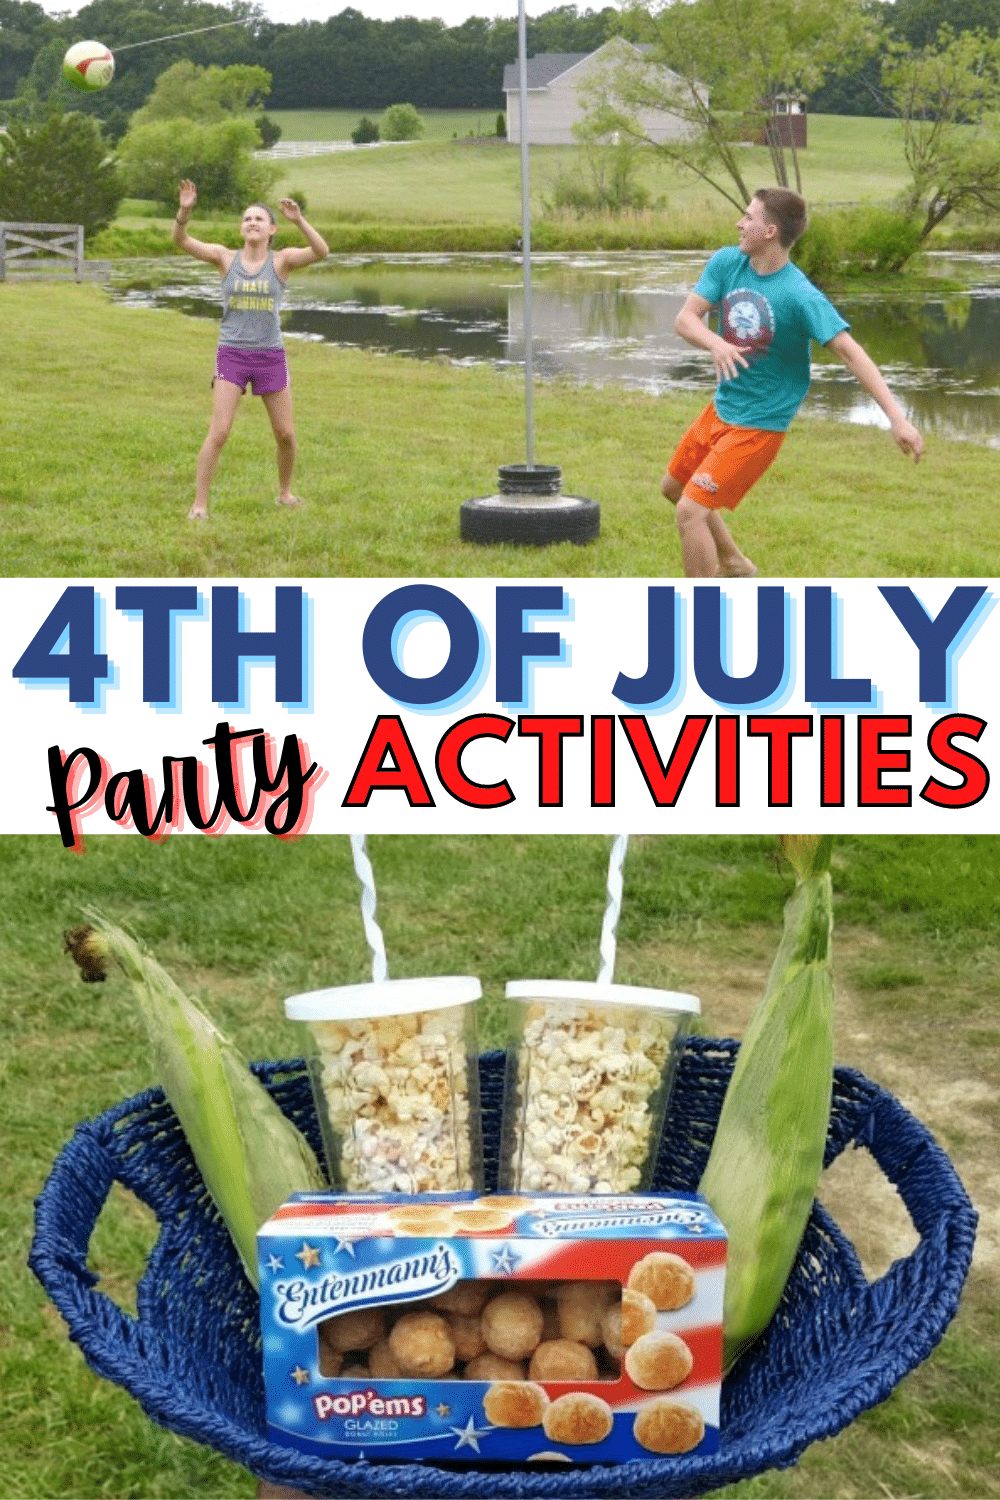 If you plan on celebrating Independence Day at home, check out this list of things to remember including recommended 4th of July party activities. #independenceday #4thofJuly #partyactivities #4thofJulyparty via @wondermomwannab